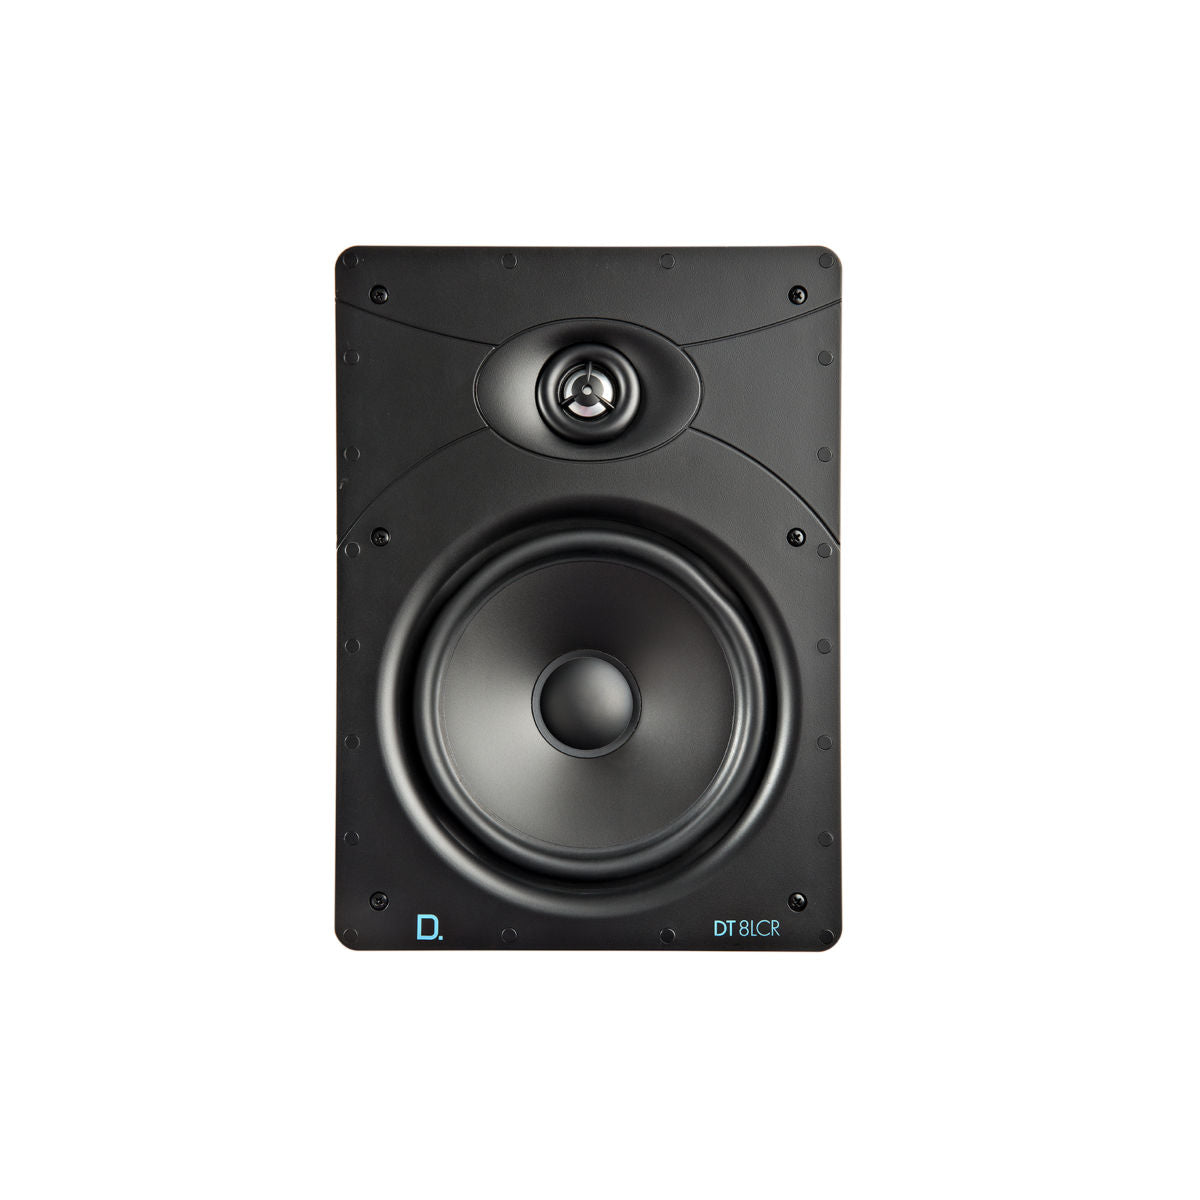 Definitive Technology DT 8 LCR DT Series Rectangular In-Wall Speaker - Ooberpad India